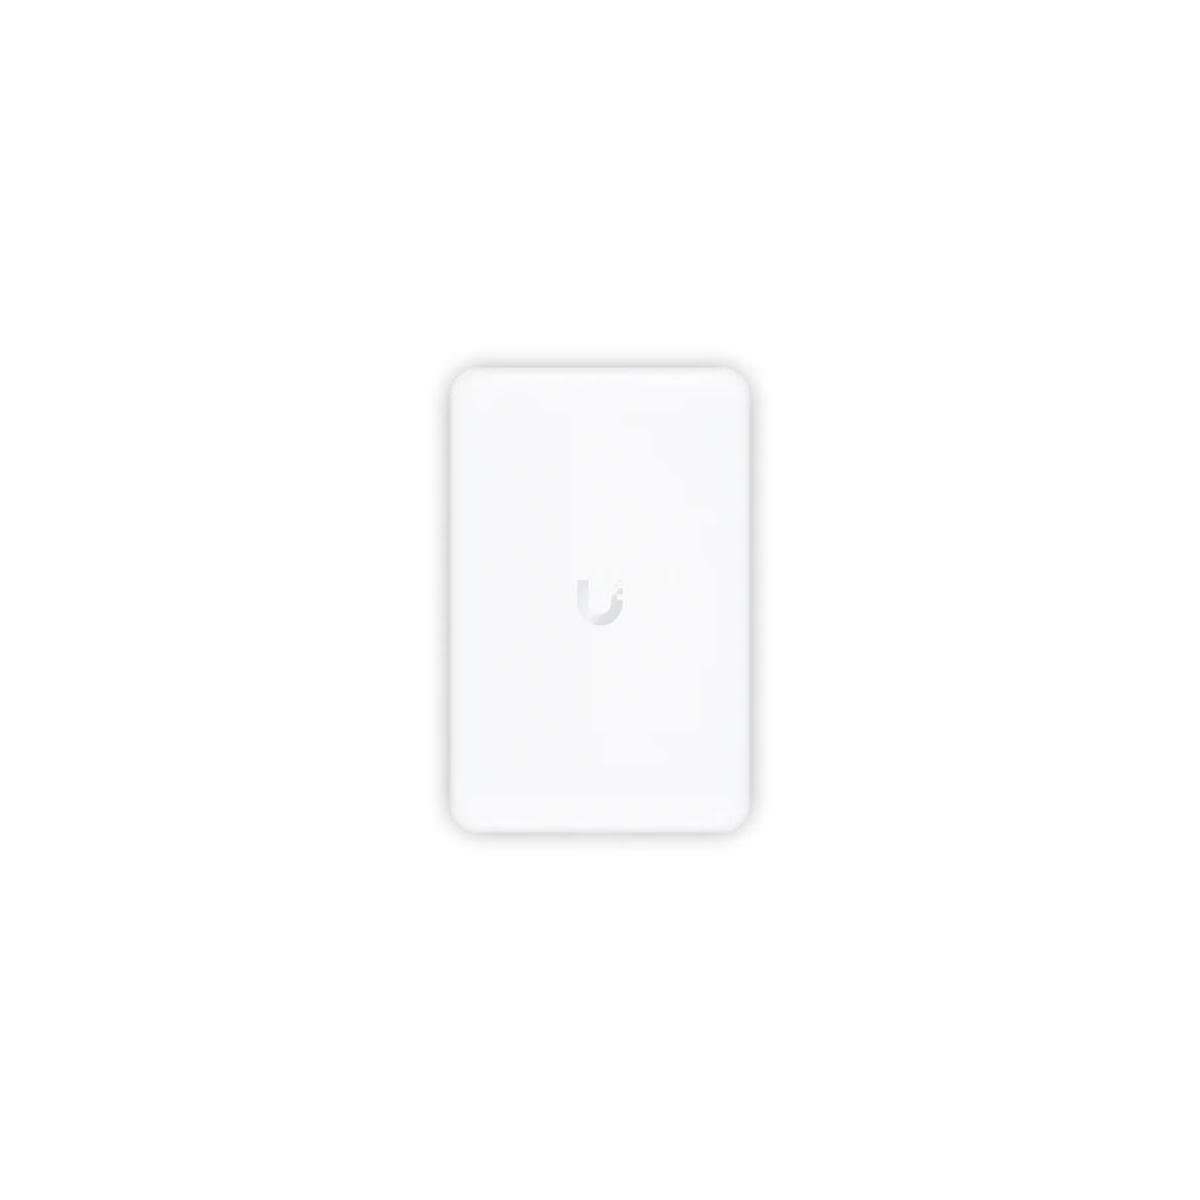 WLAN-Antenne Ubiquiti Networks WiFiMan-Assistent